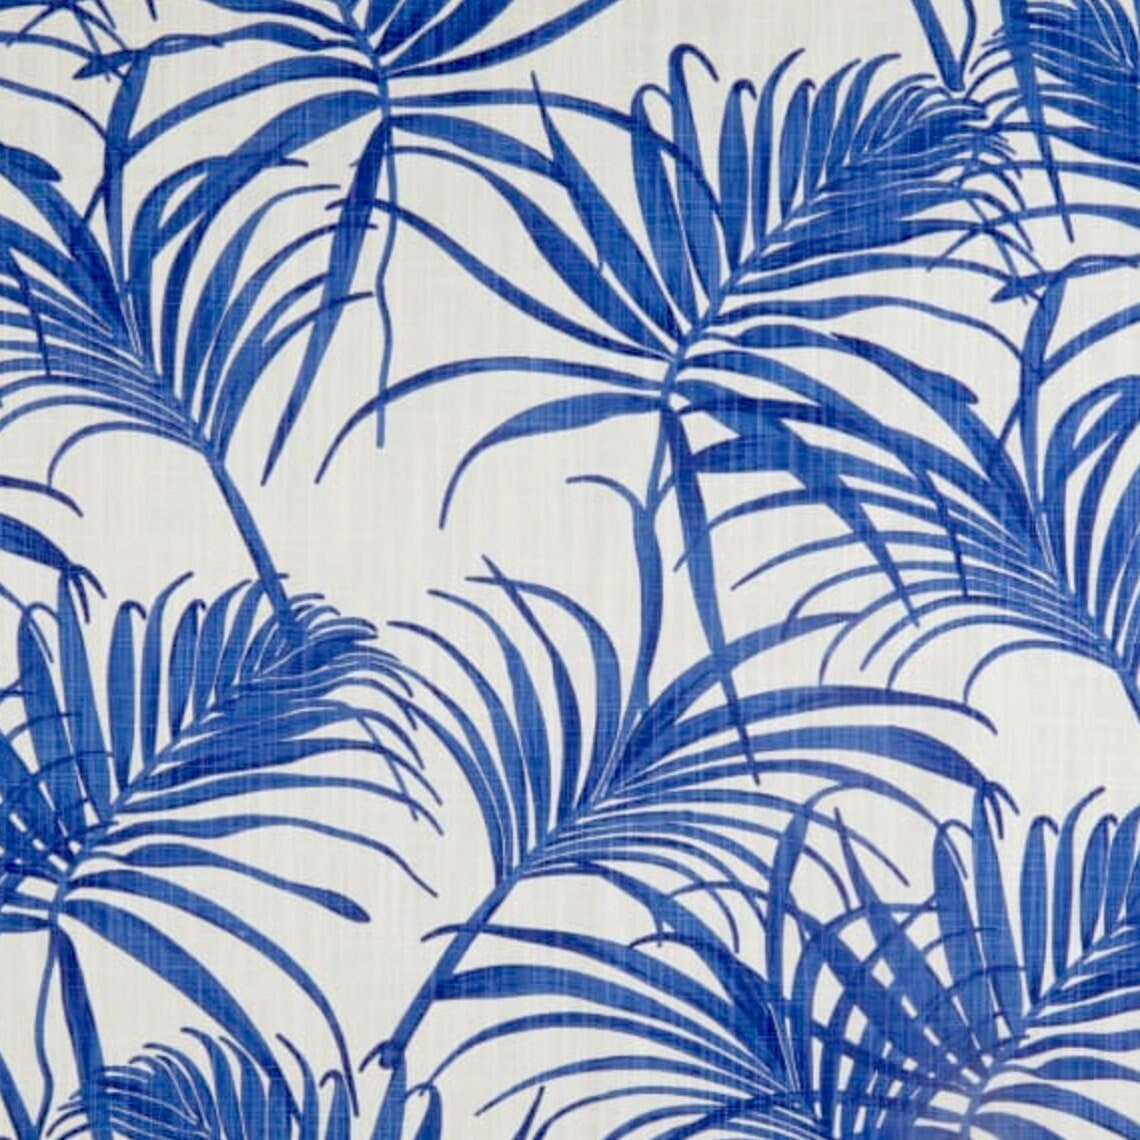 pillow sham in karoo commodore blue watercolor tropical foliage